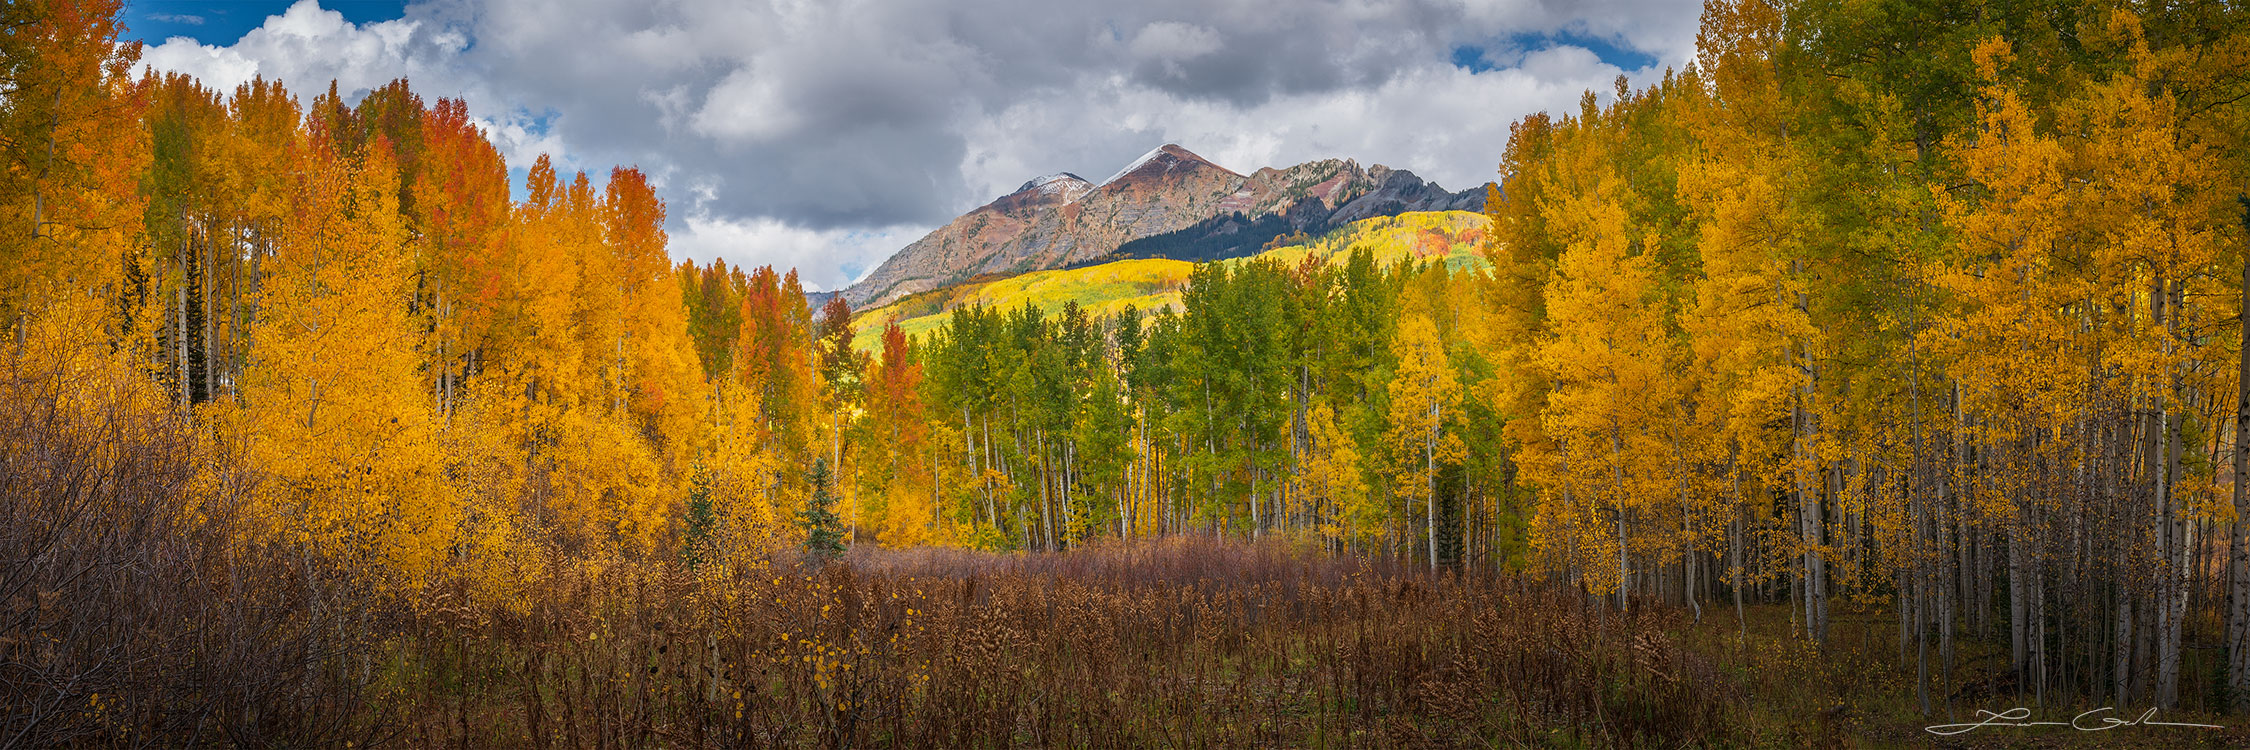 Aspen forest cathedral with yellow aspens and mountains peaks in the background - Gintchin Fine Art